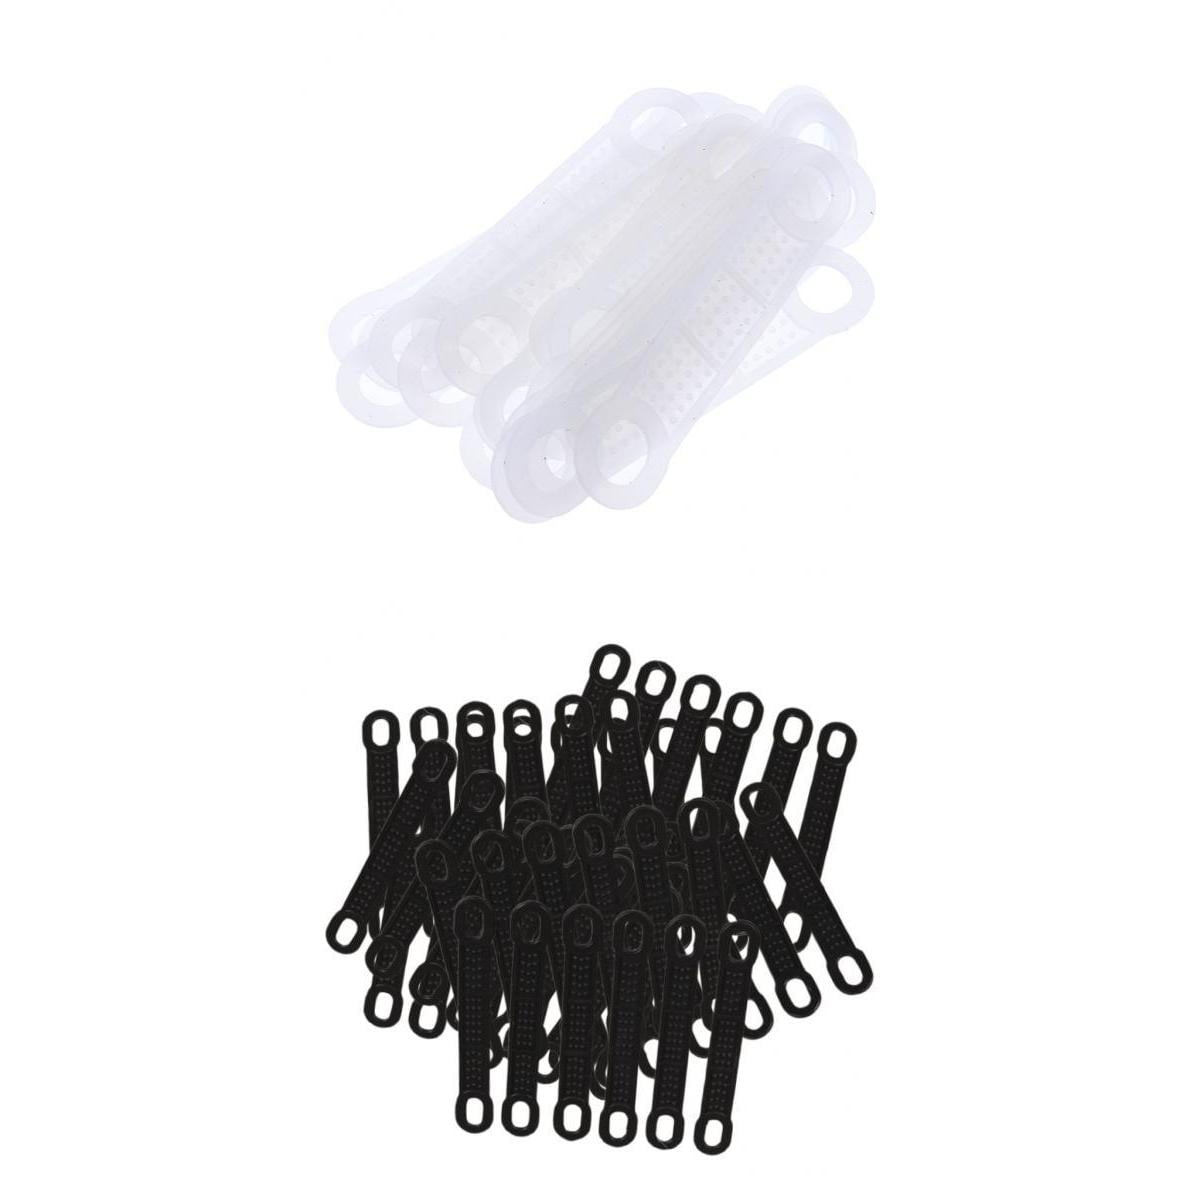 40 Pack Anti Slip Clear Rubber Clothes Hanger Grips Clothing Hanger Strips 